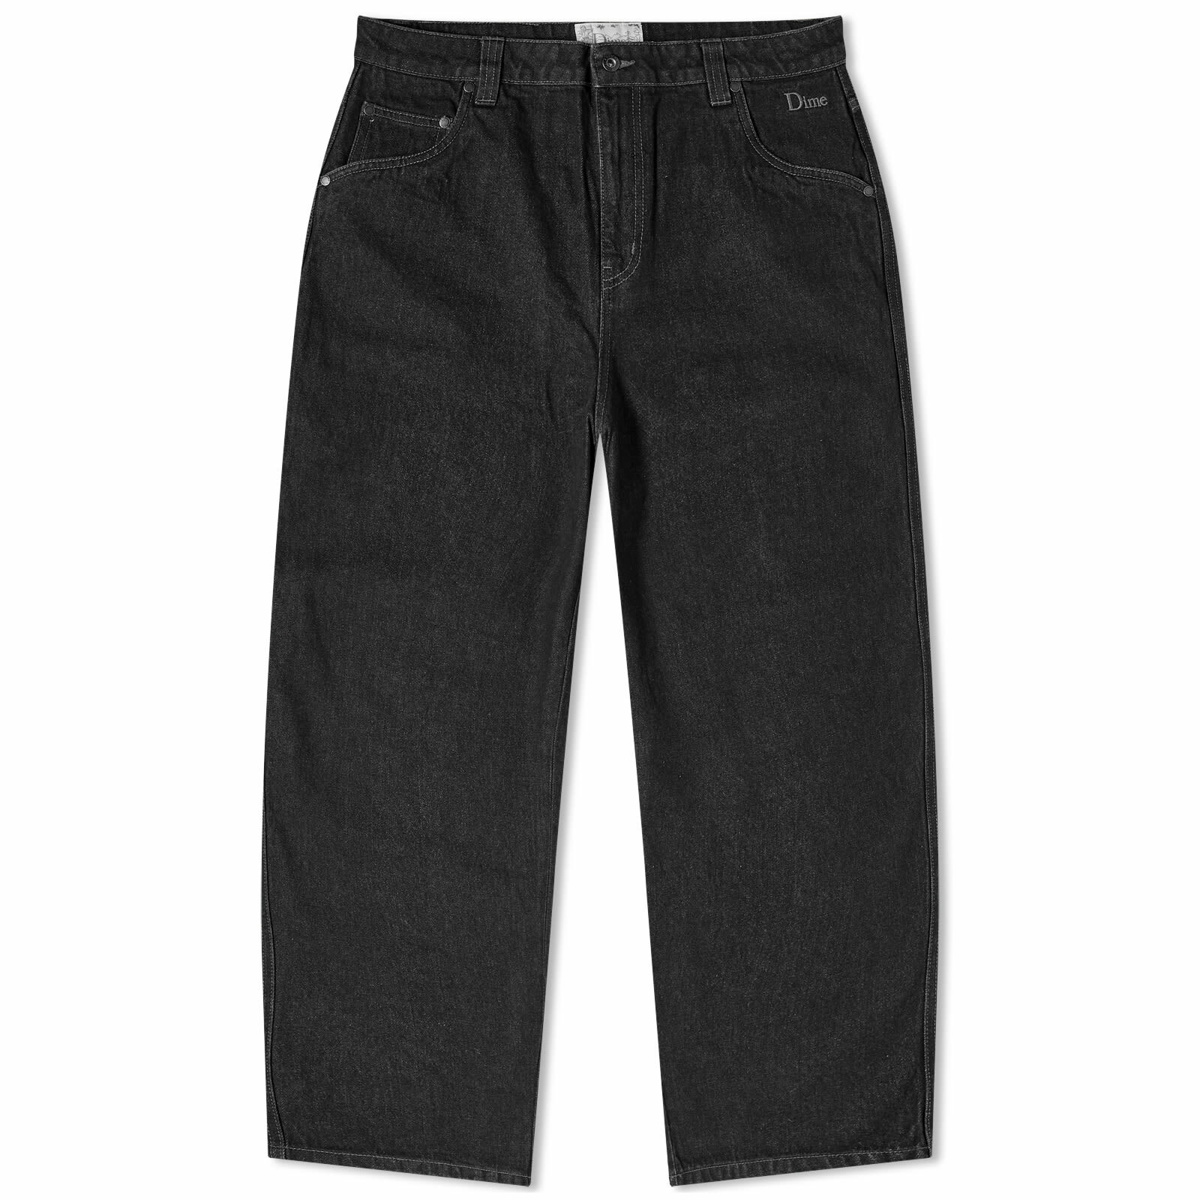 Dime Men's Classic Baggy Denim Pant in Washed Black Dime